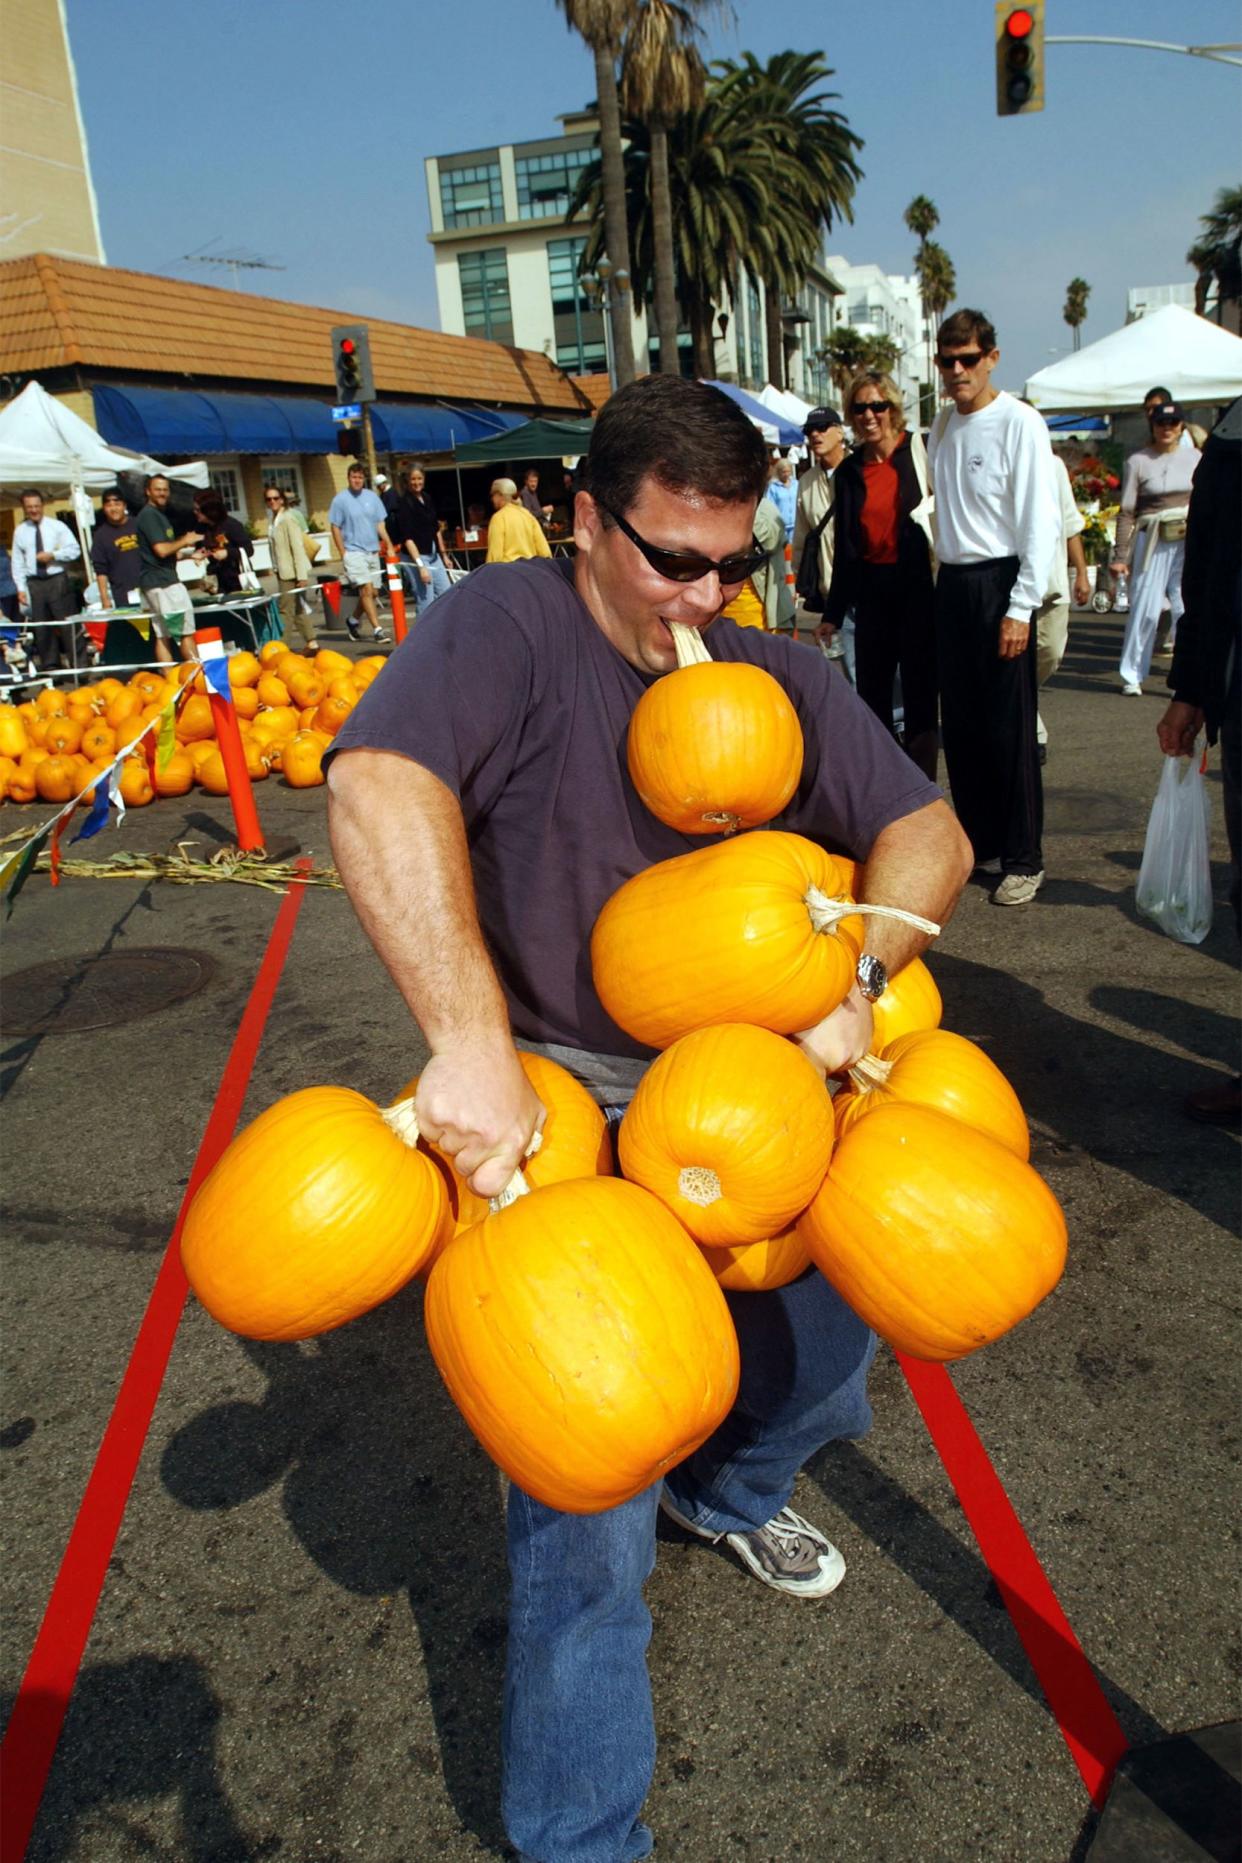 For $5, Mike Santini carries all the pumpkins he can carry, which in his case was 10, down a 25-foot walkway during a promotion at a farmer's market October 30, 2002 in Santa Monica, California.